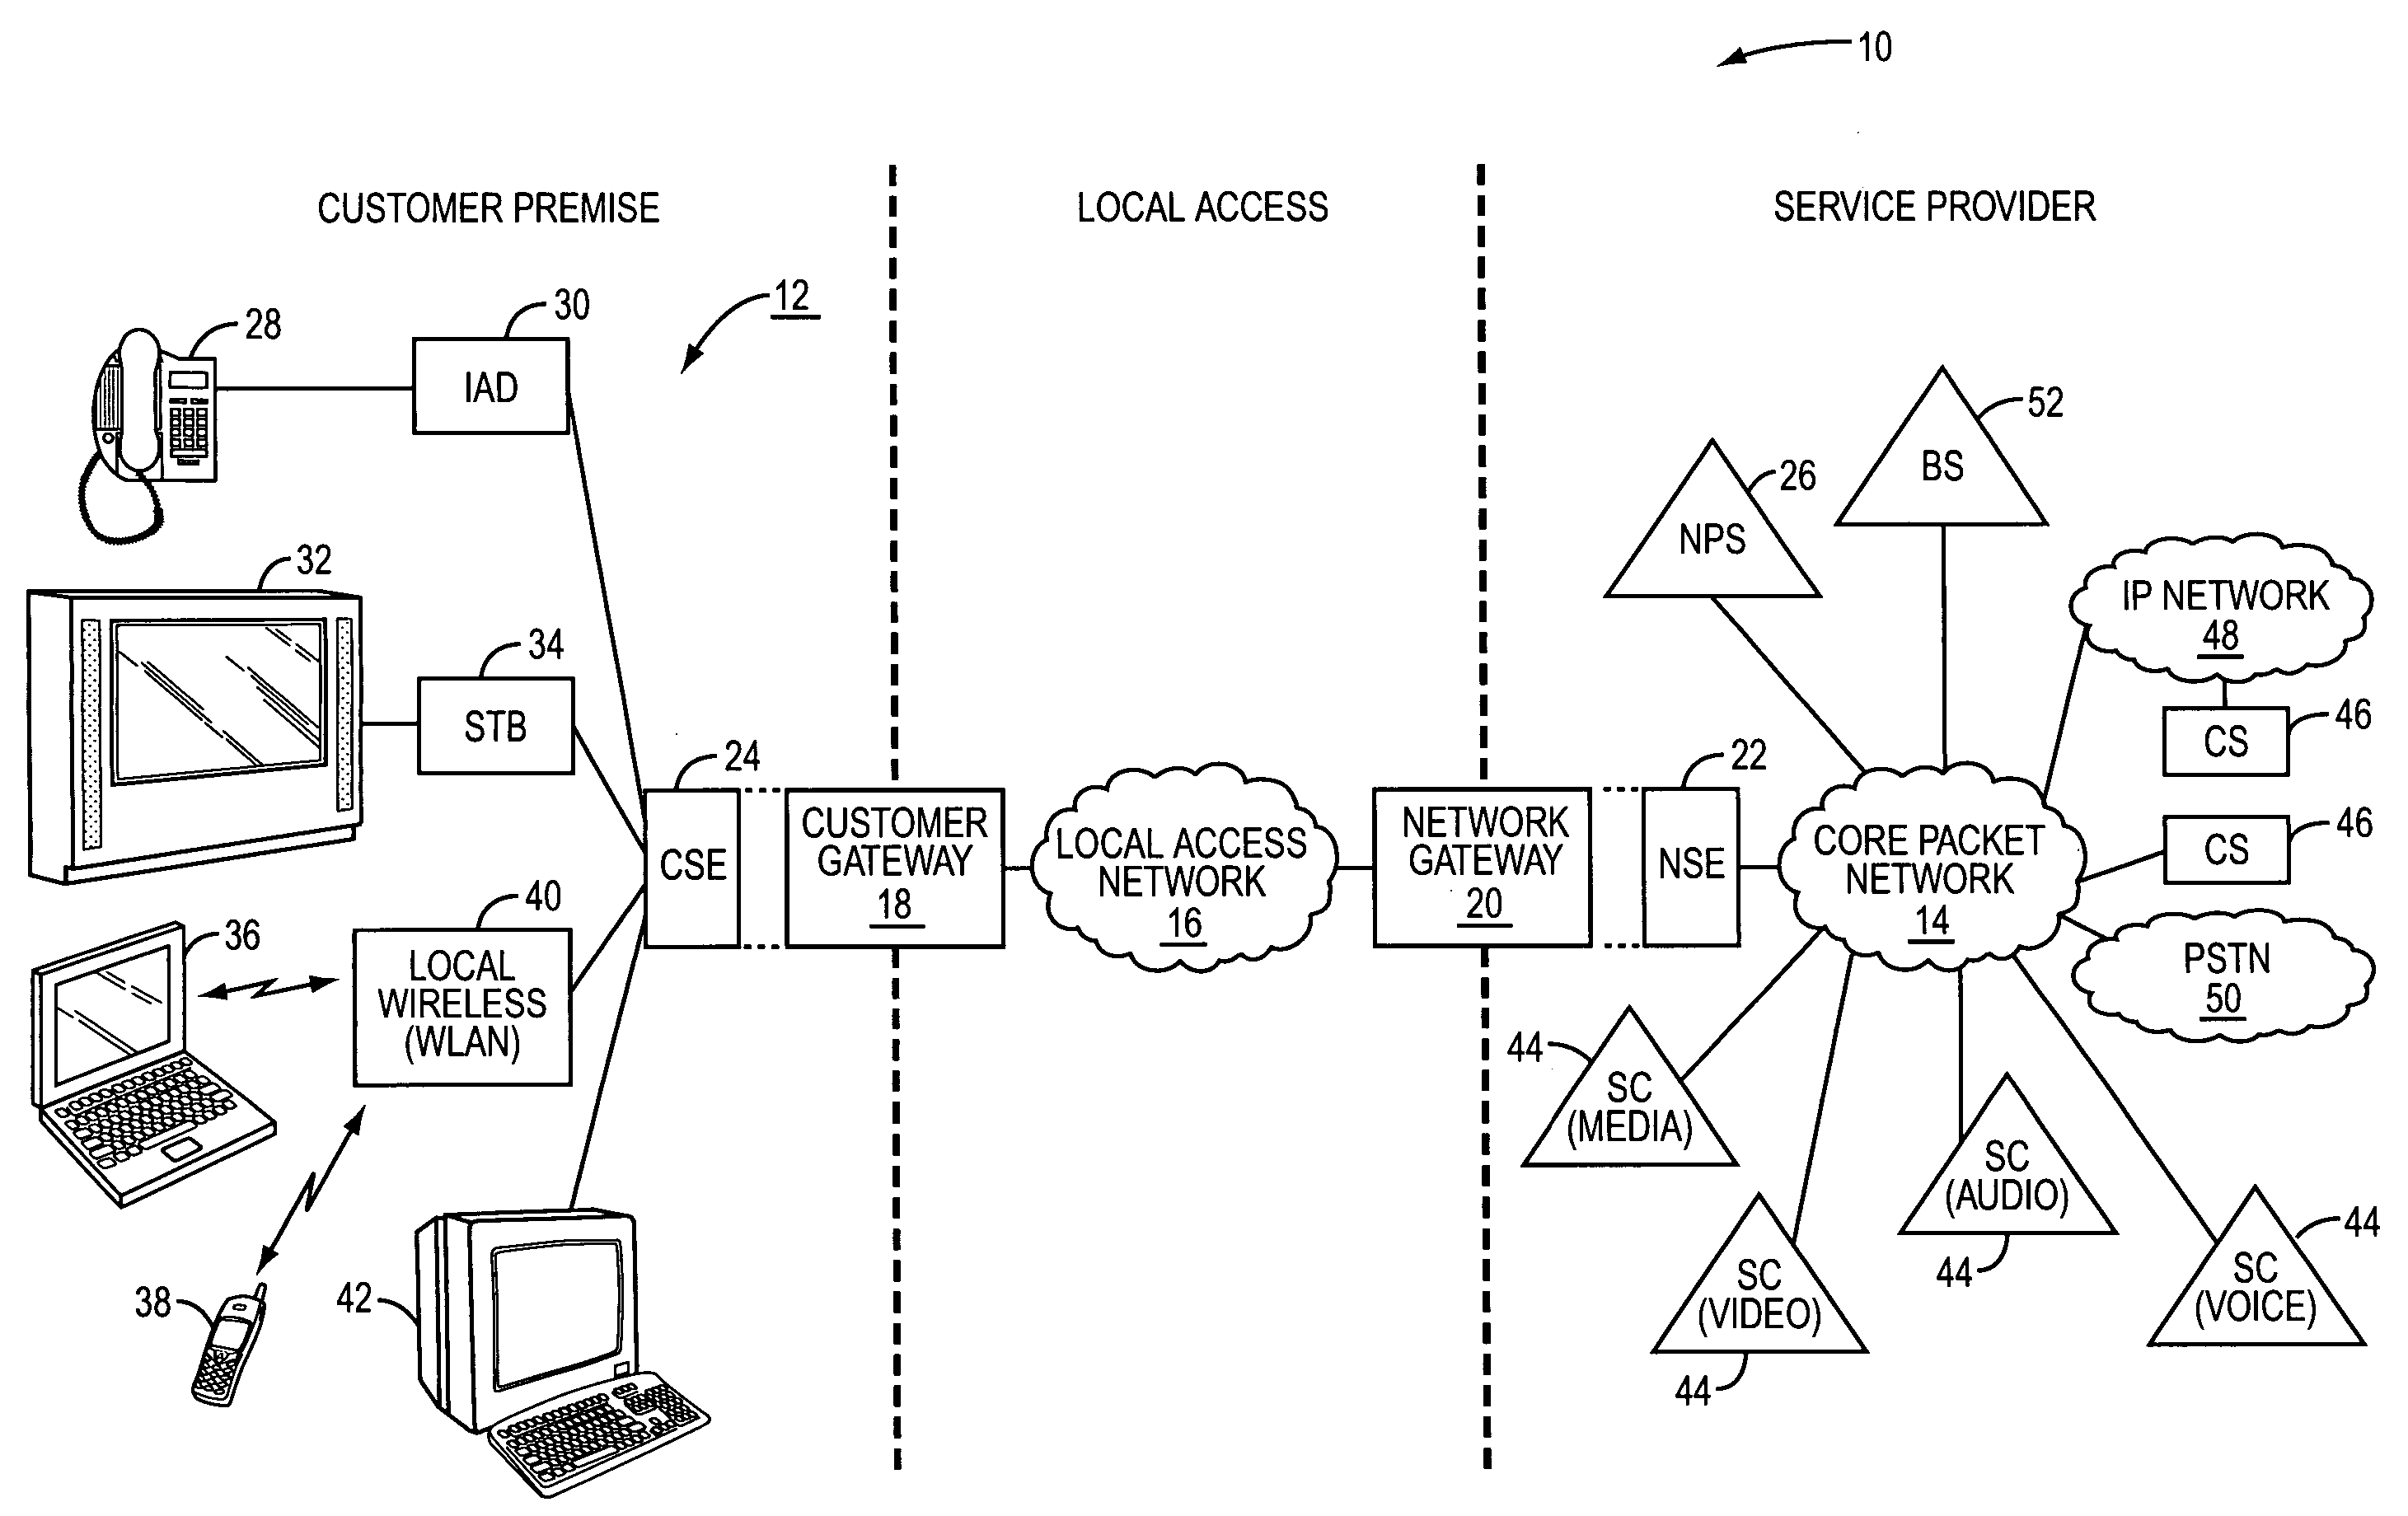 Multiple services with policy enforcement over a common network